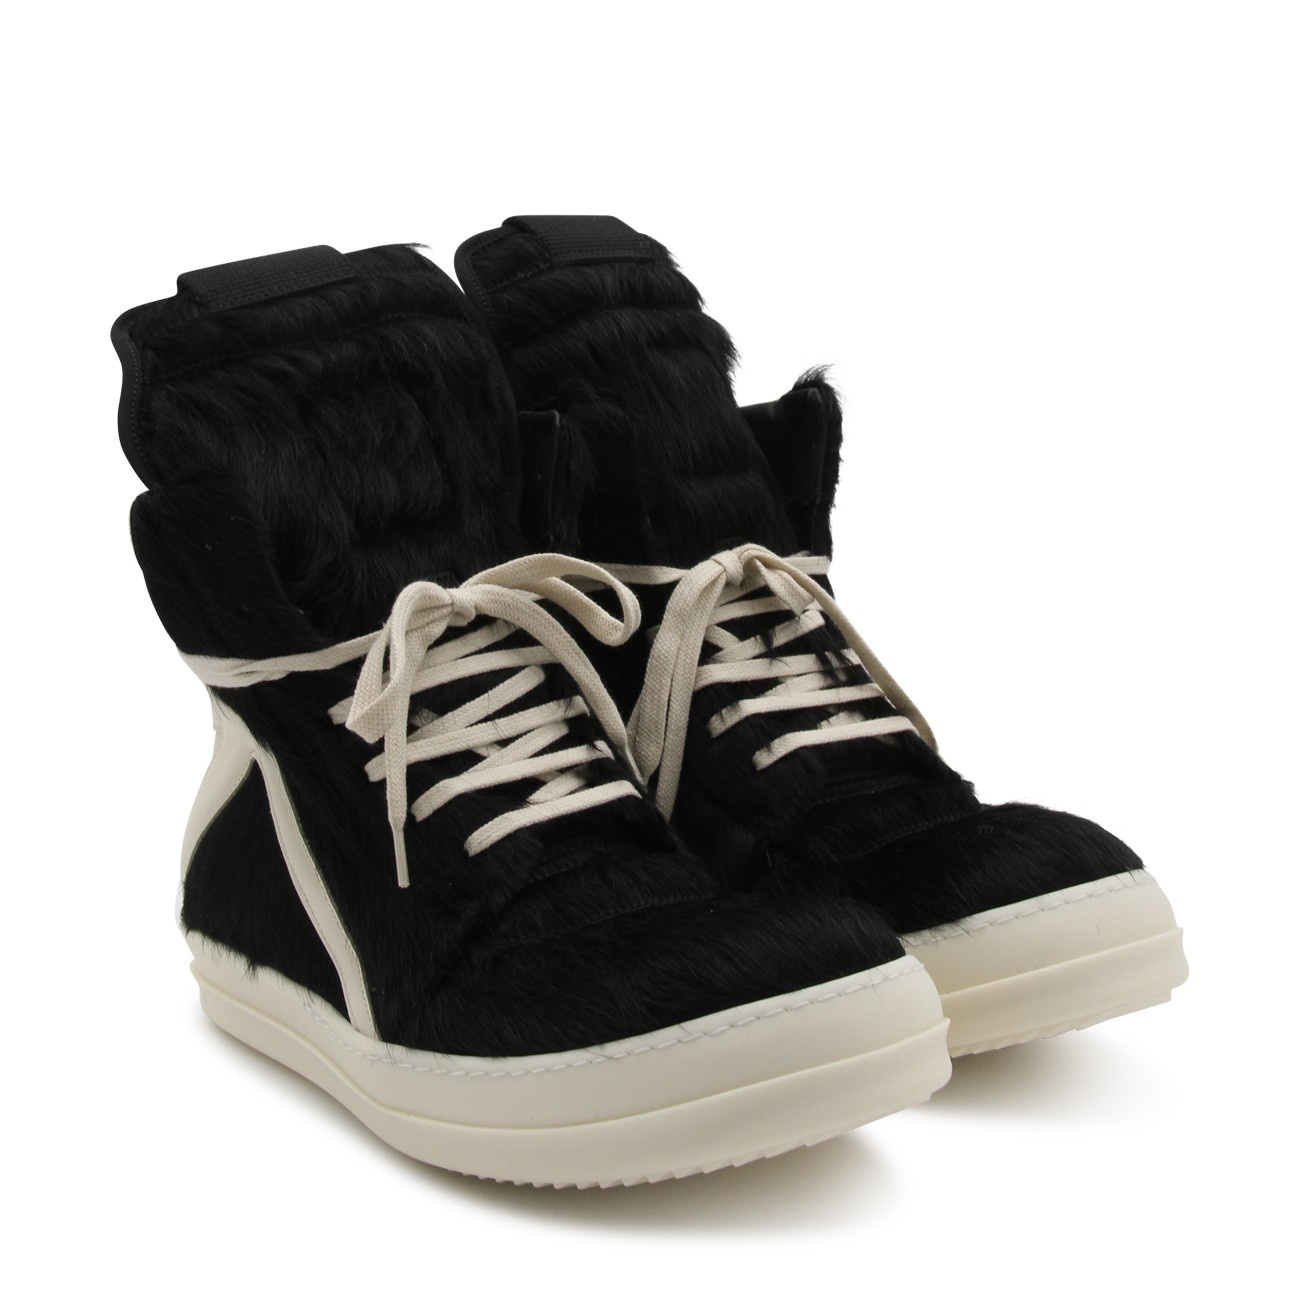 black and white leather geobasket sneakers - 2